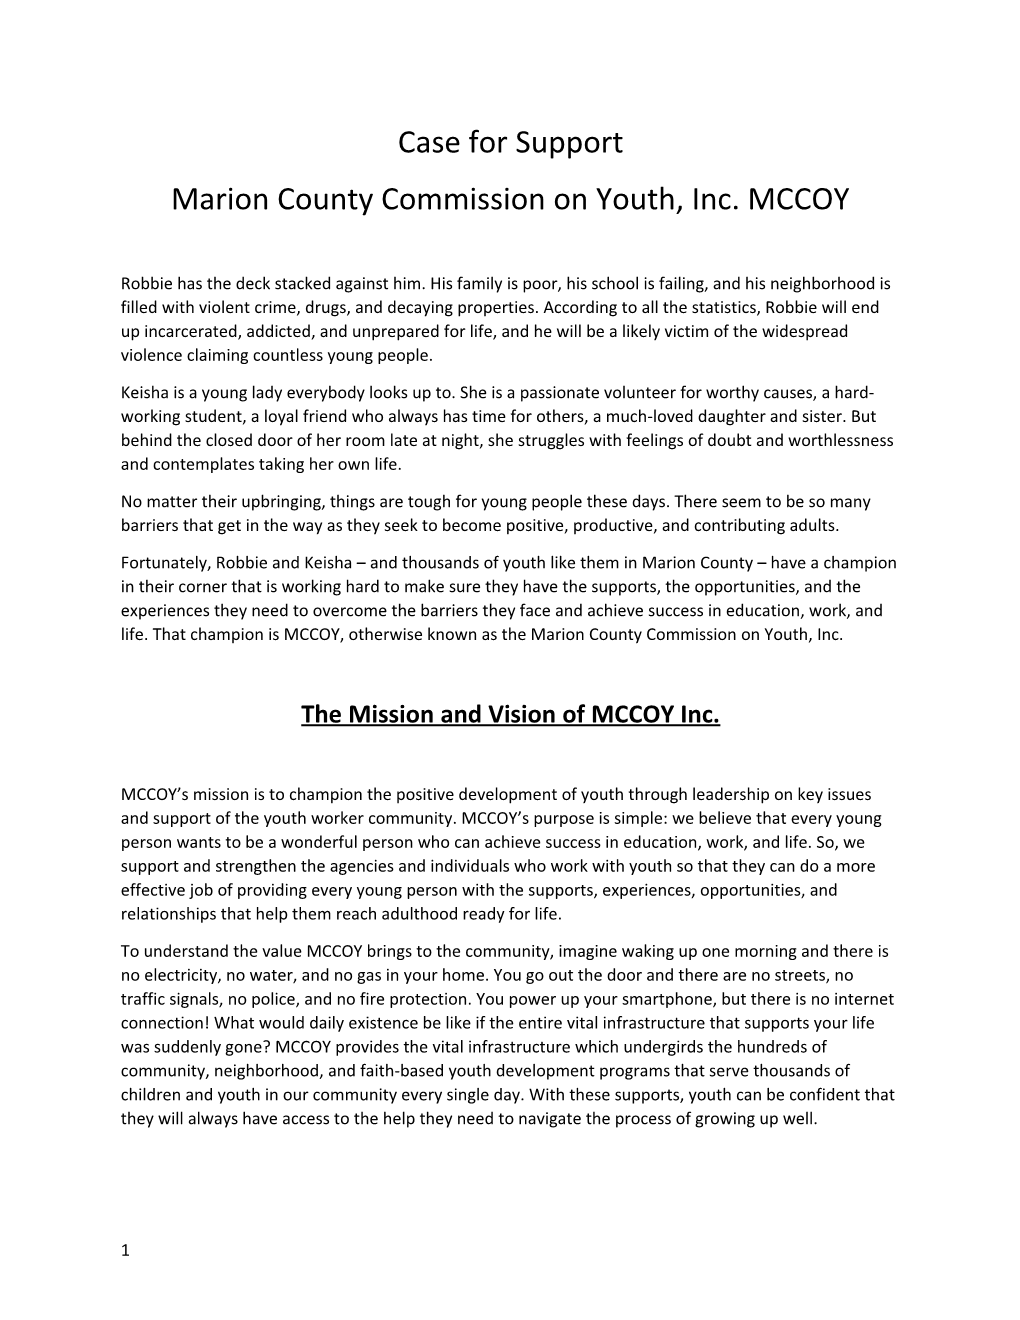 Marion County Commission on Youth, Inc.MCCOY